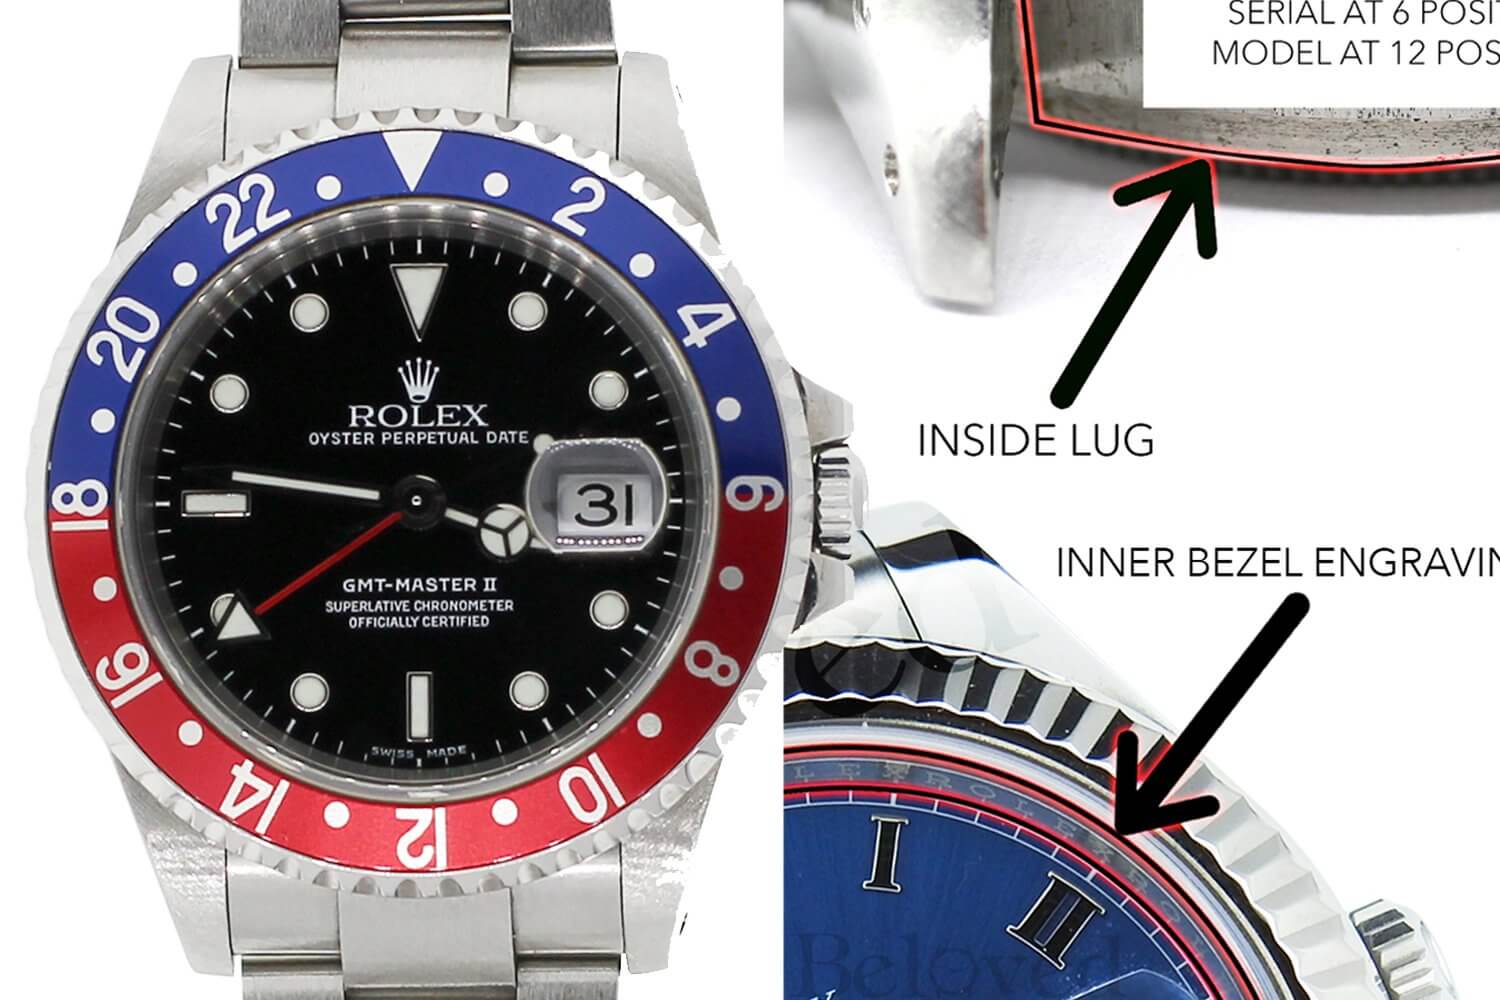 Serial Number Production Year Guide | How old is my Rolex?